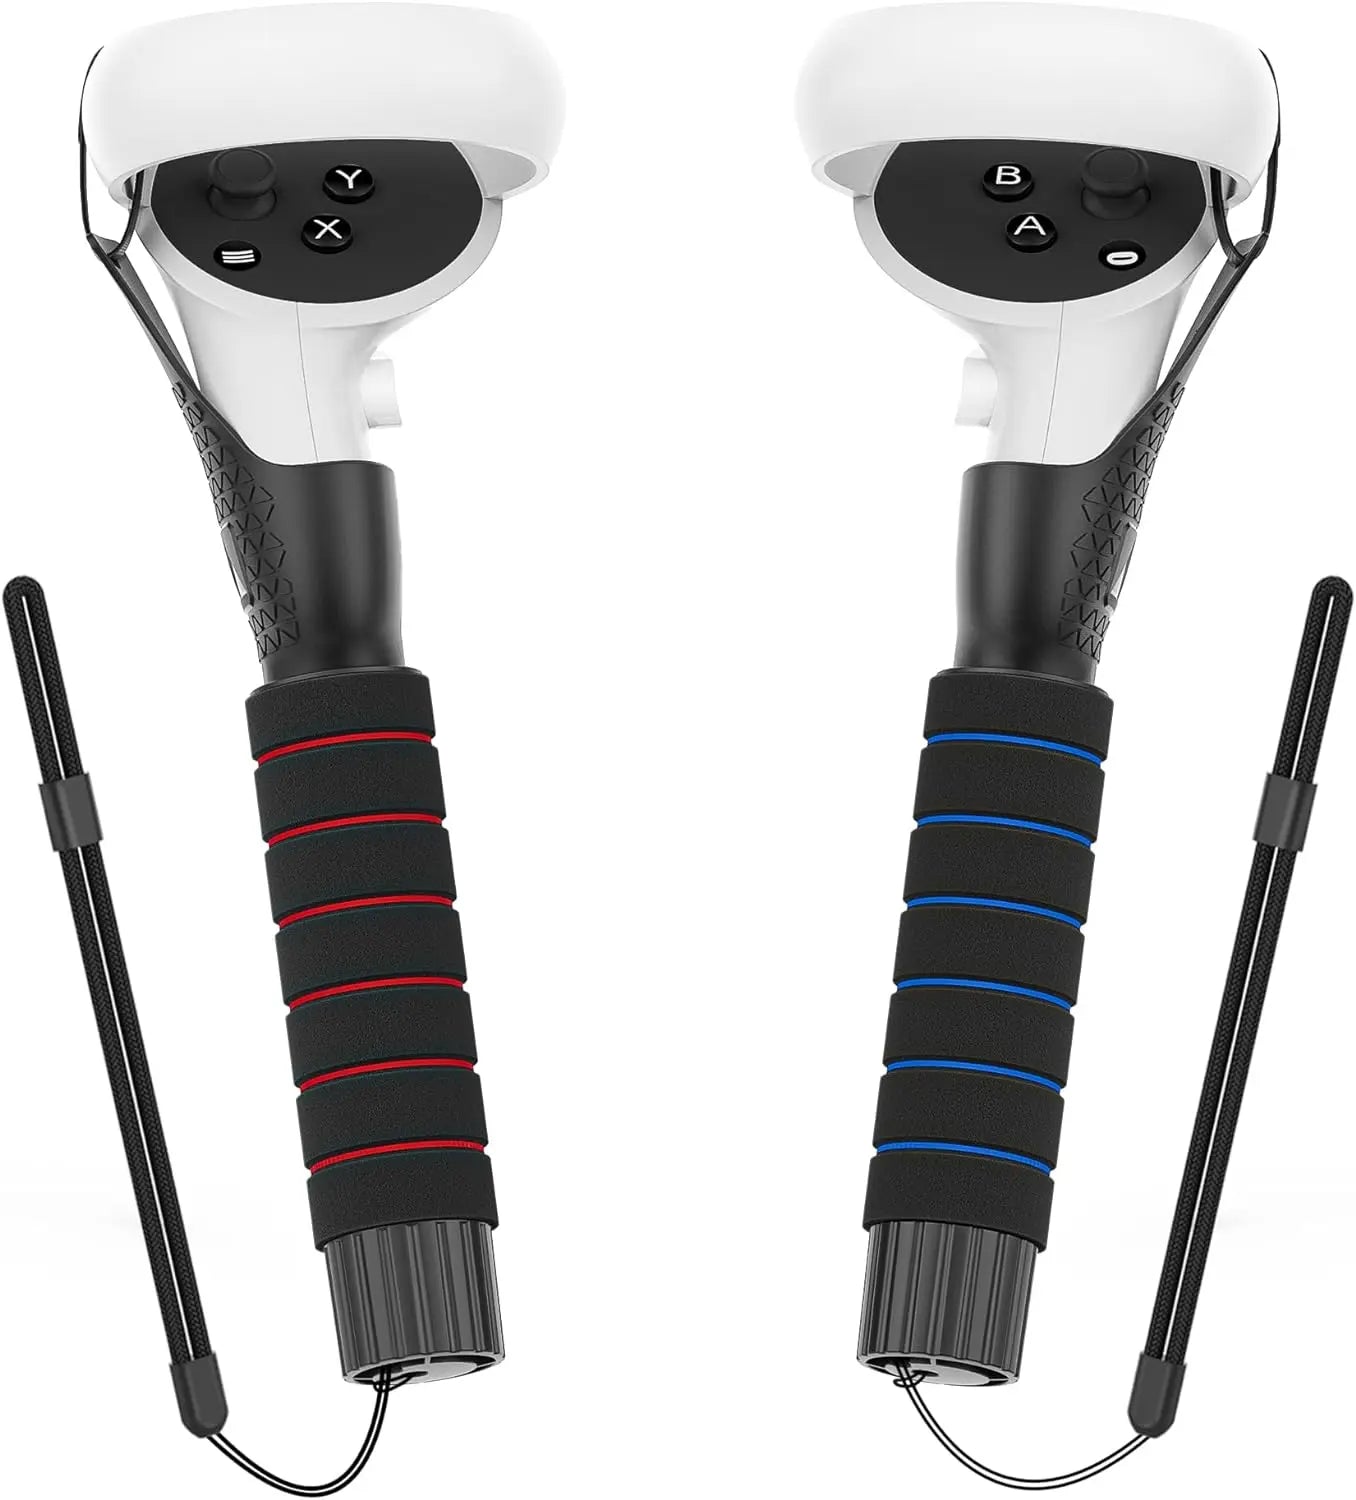 AMVR Beat Saber Handle 2-in-1 Extension Grips for Quest 2 AMVRSHOP